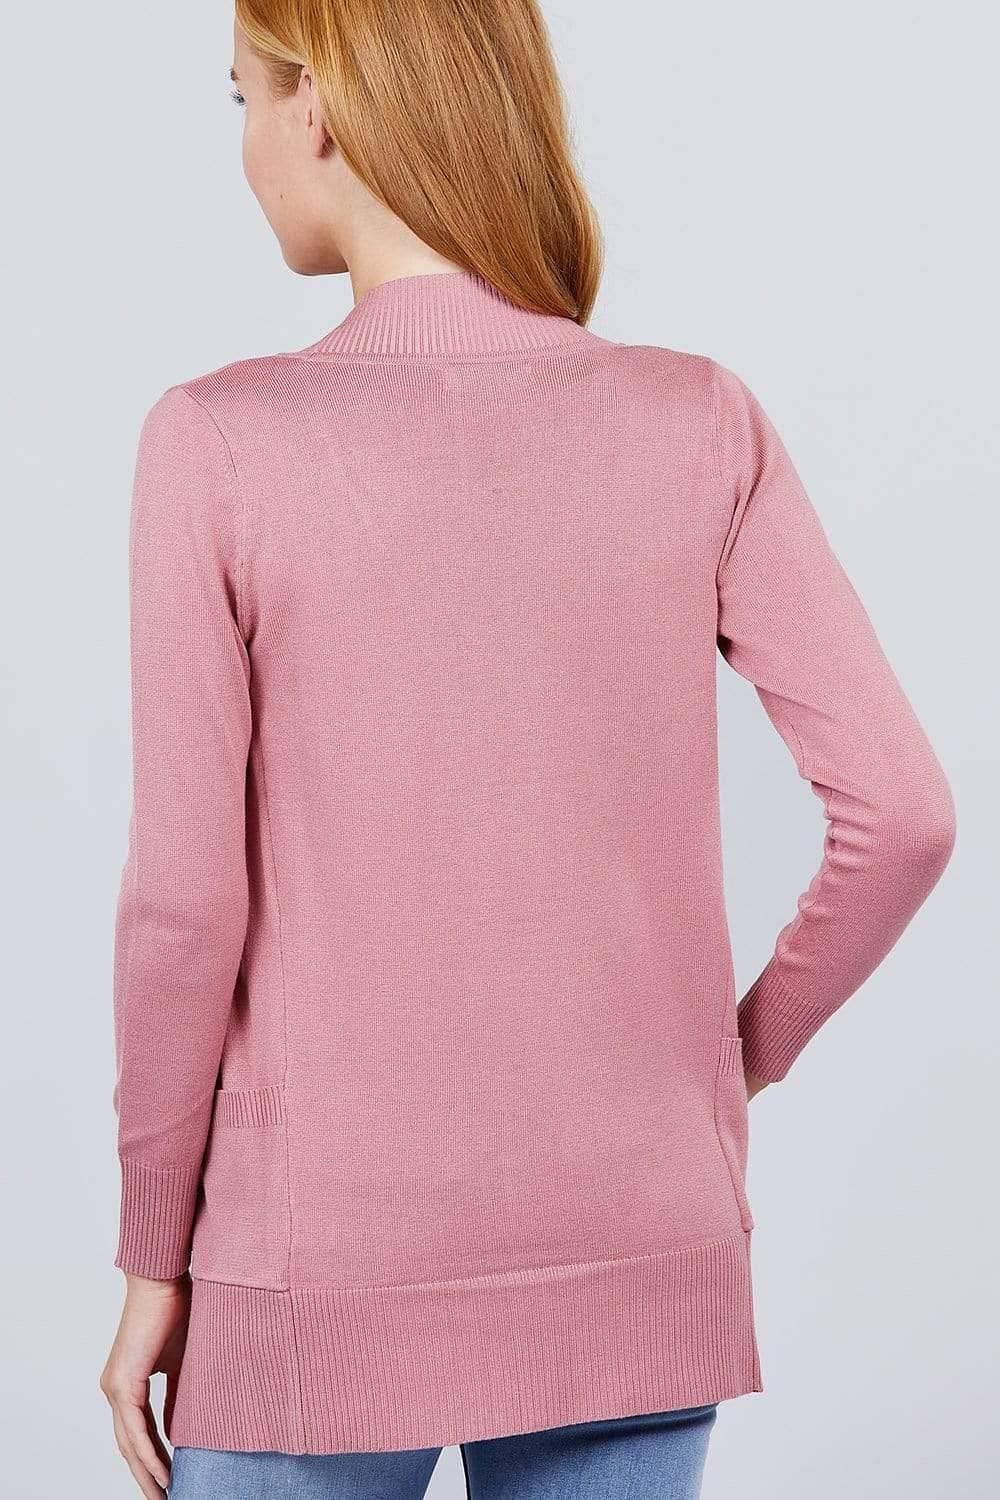 Pink Long Sleeve Open Front Rib Knit Cardigan - Shopping Therapy Cardigan